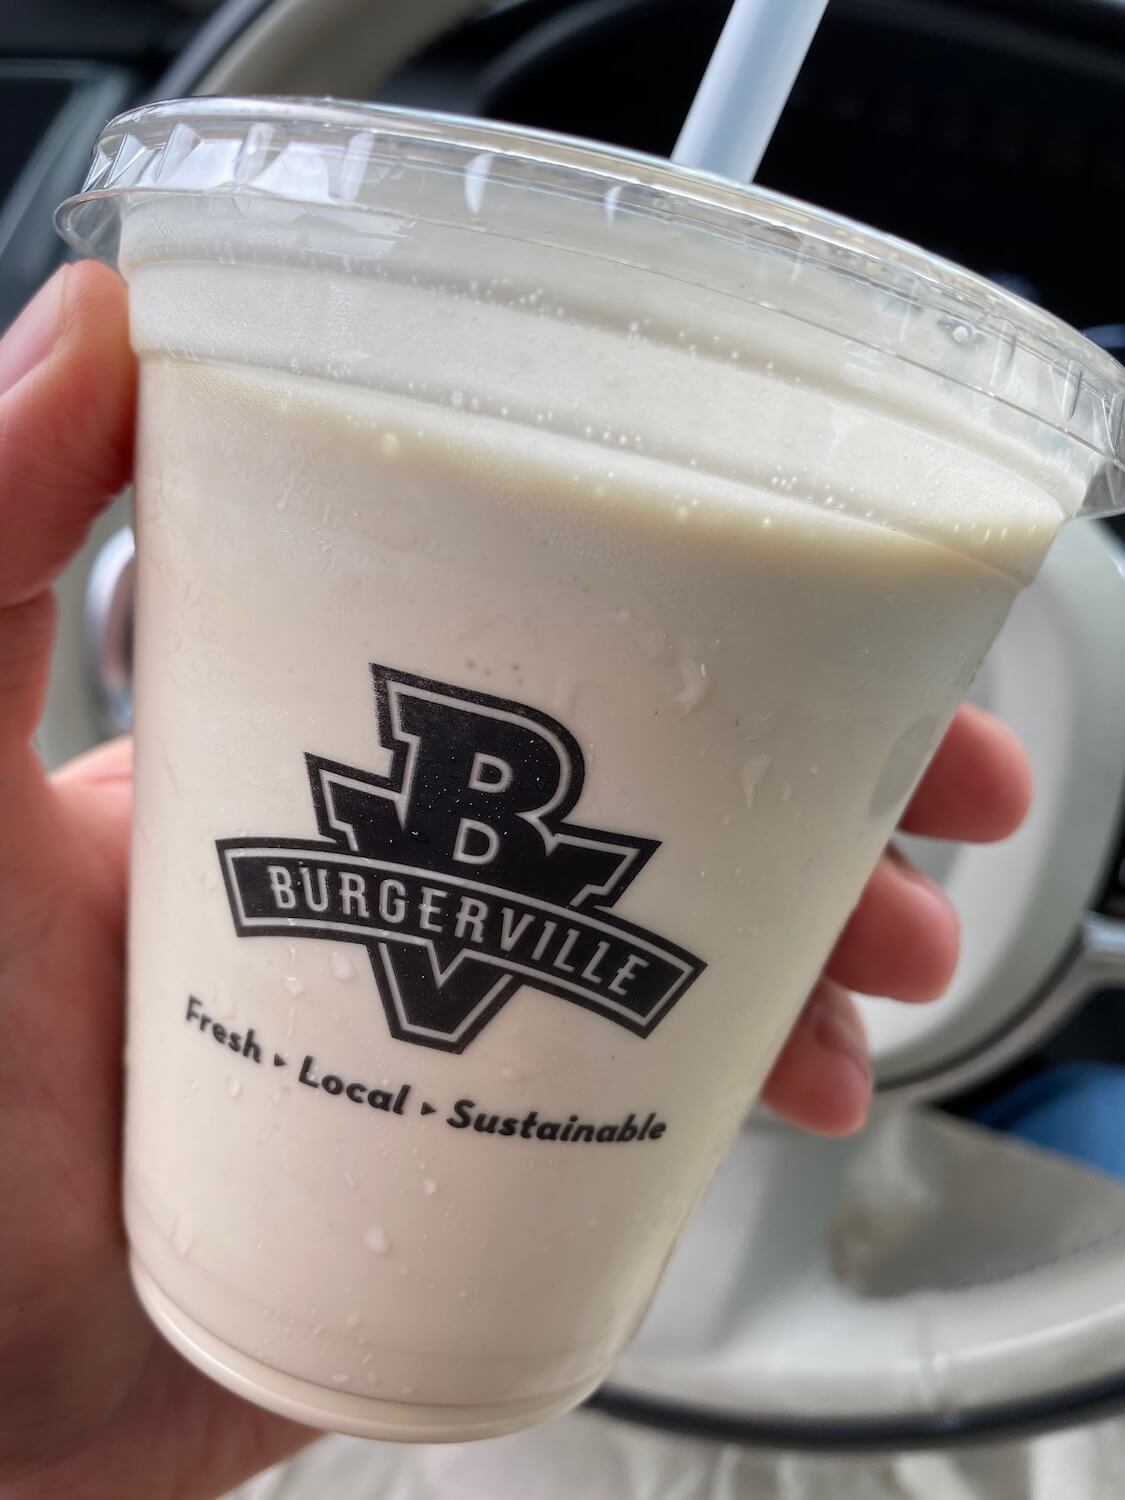 A burgerville milkshake is always welcome delight after a day trip.  Here, the plastic drink container shows the logo and name of Burgerville with a chocolaty substance that looks like a milkshake is inside.  